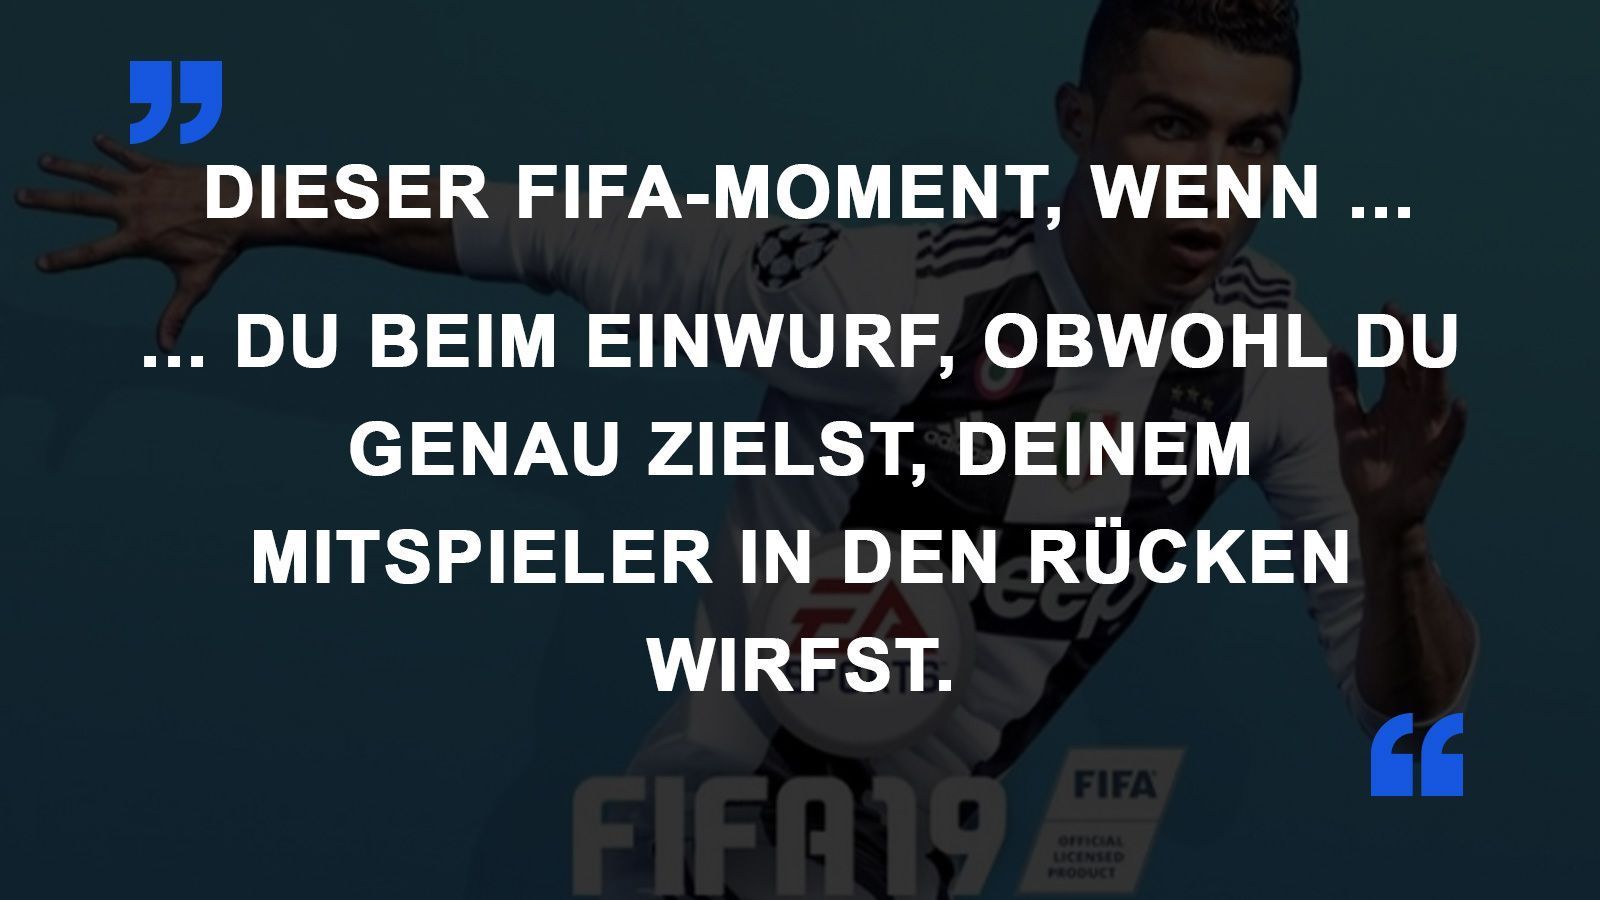 
                <strong>FIFA Momente Einwurf</strong><br>
                
              